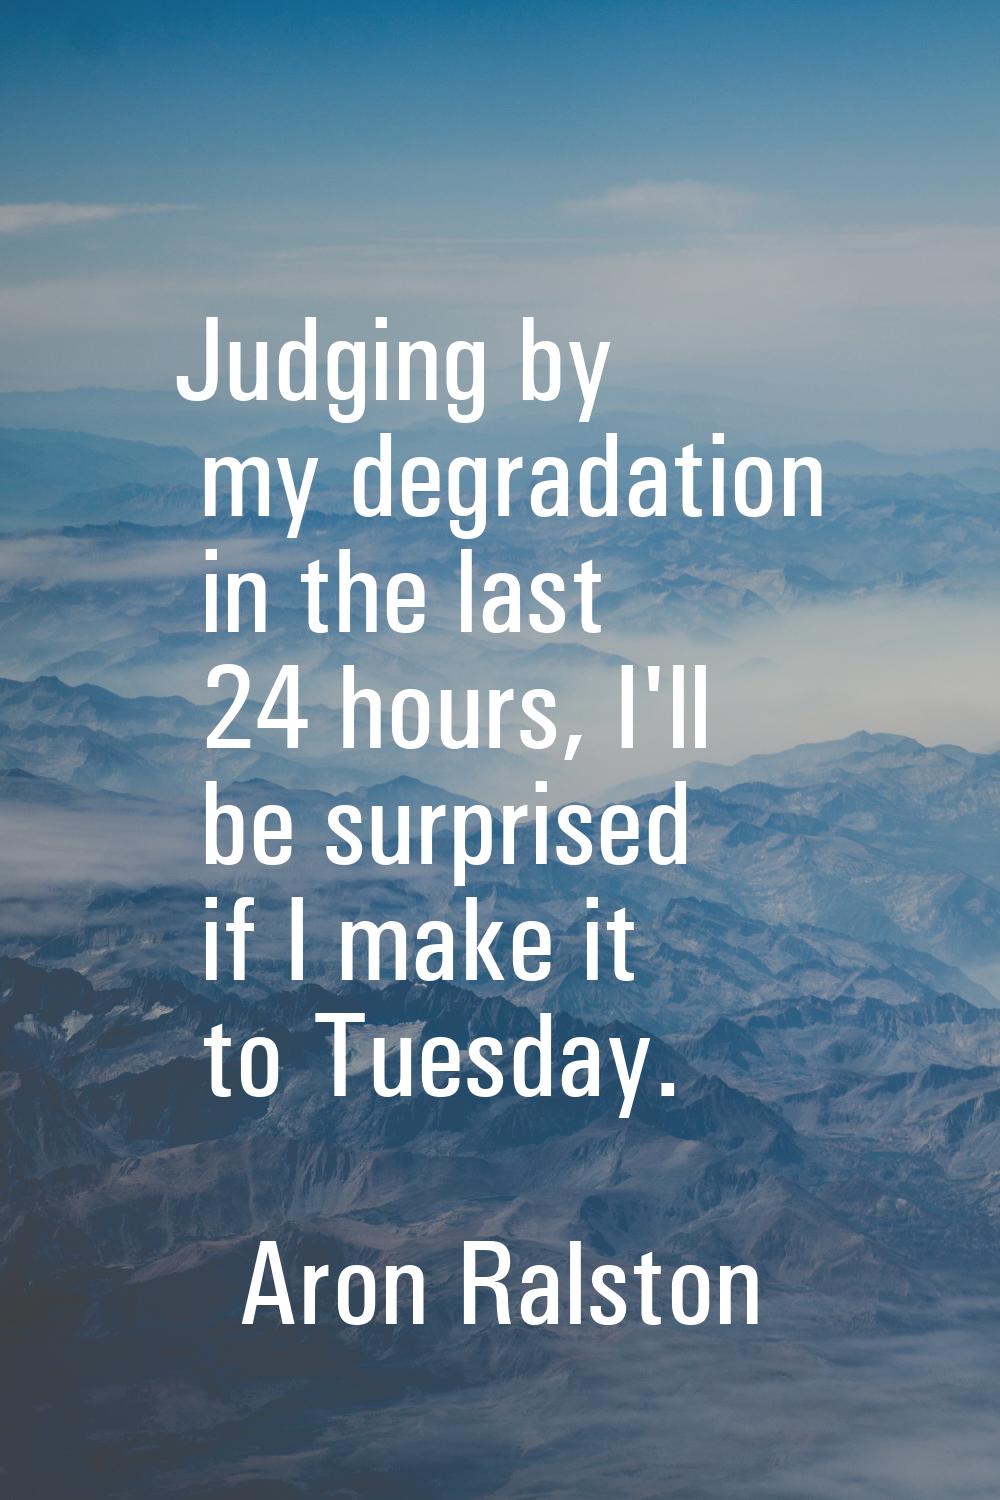 Judging by my degradation in the last 24 hours, I'll be surprised if I make it to Tuesday.